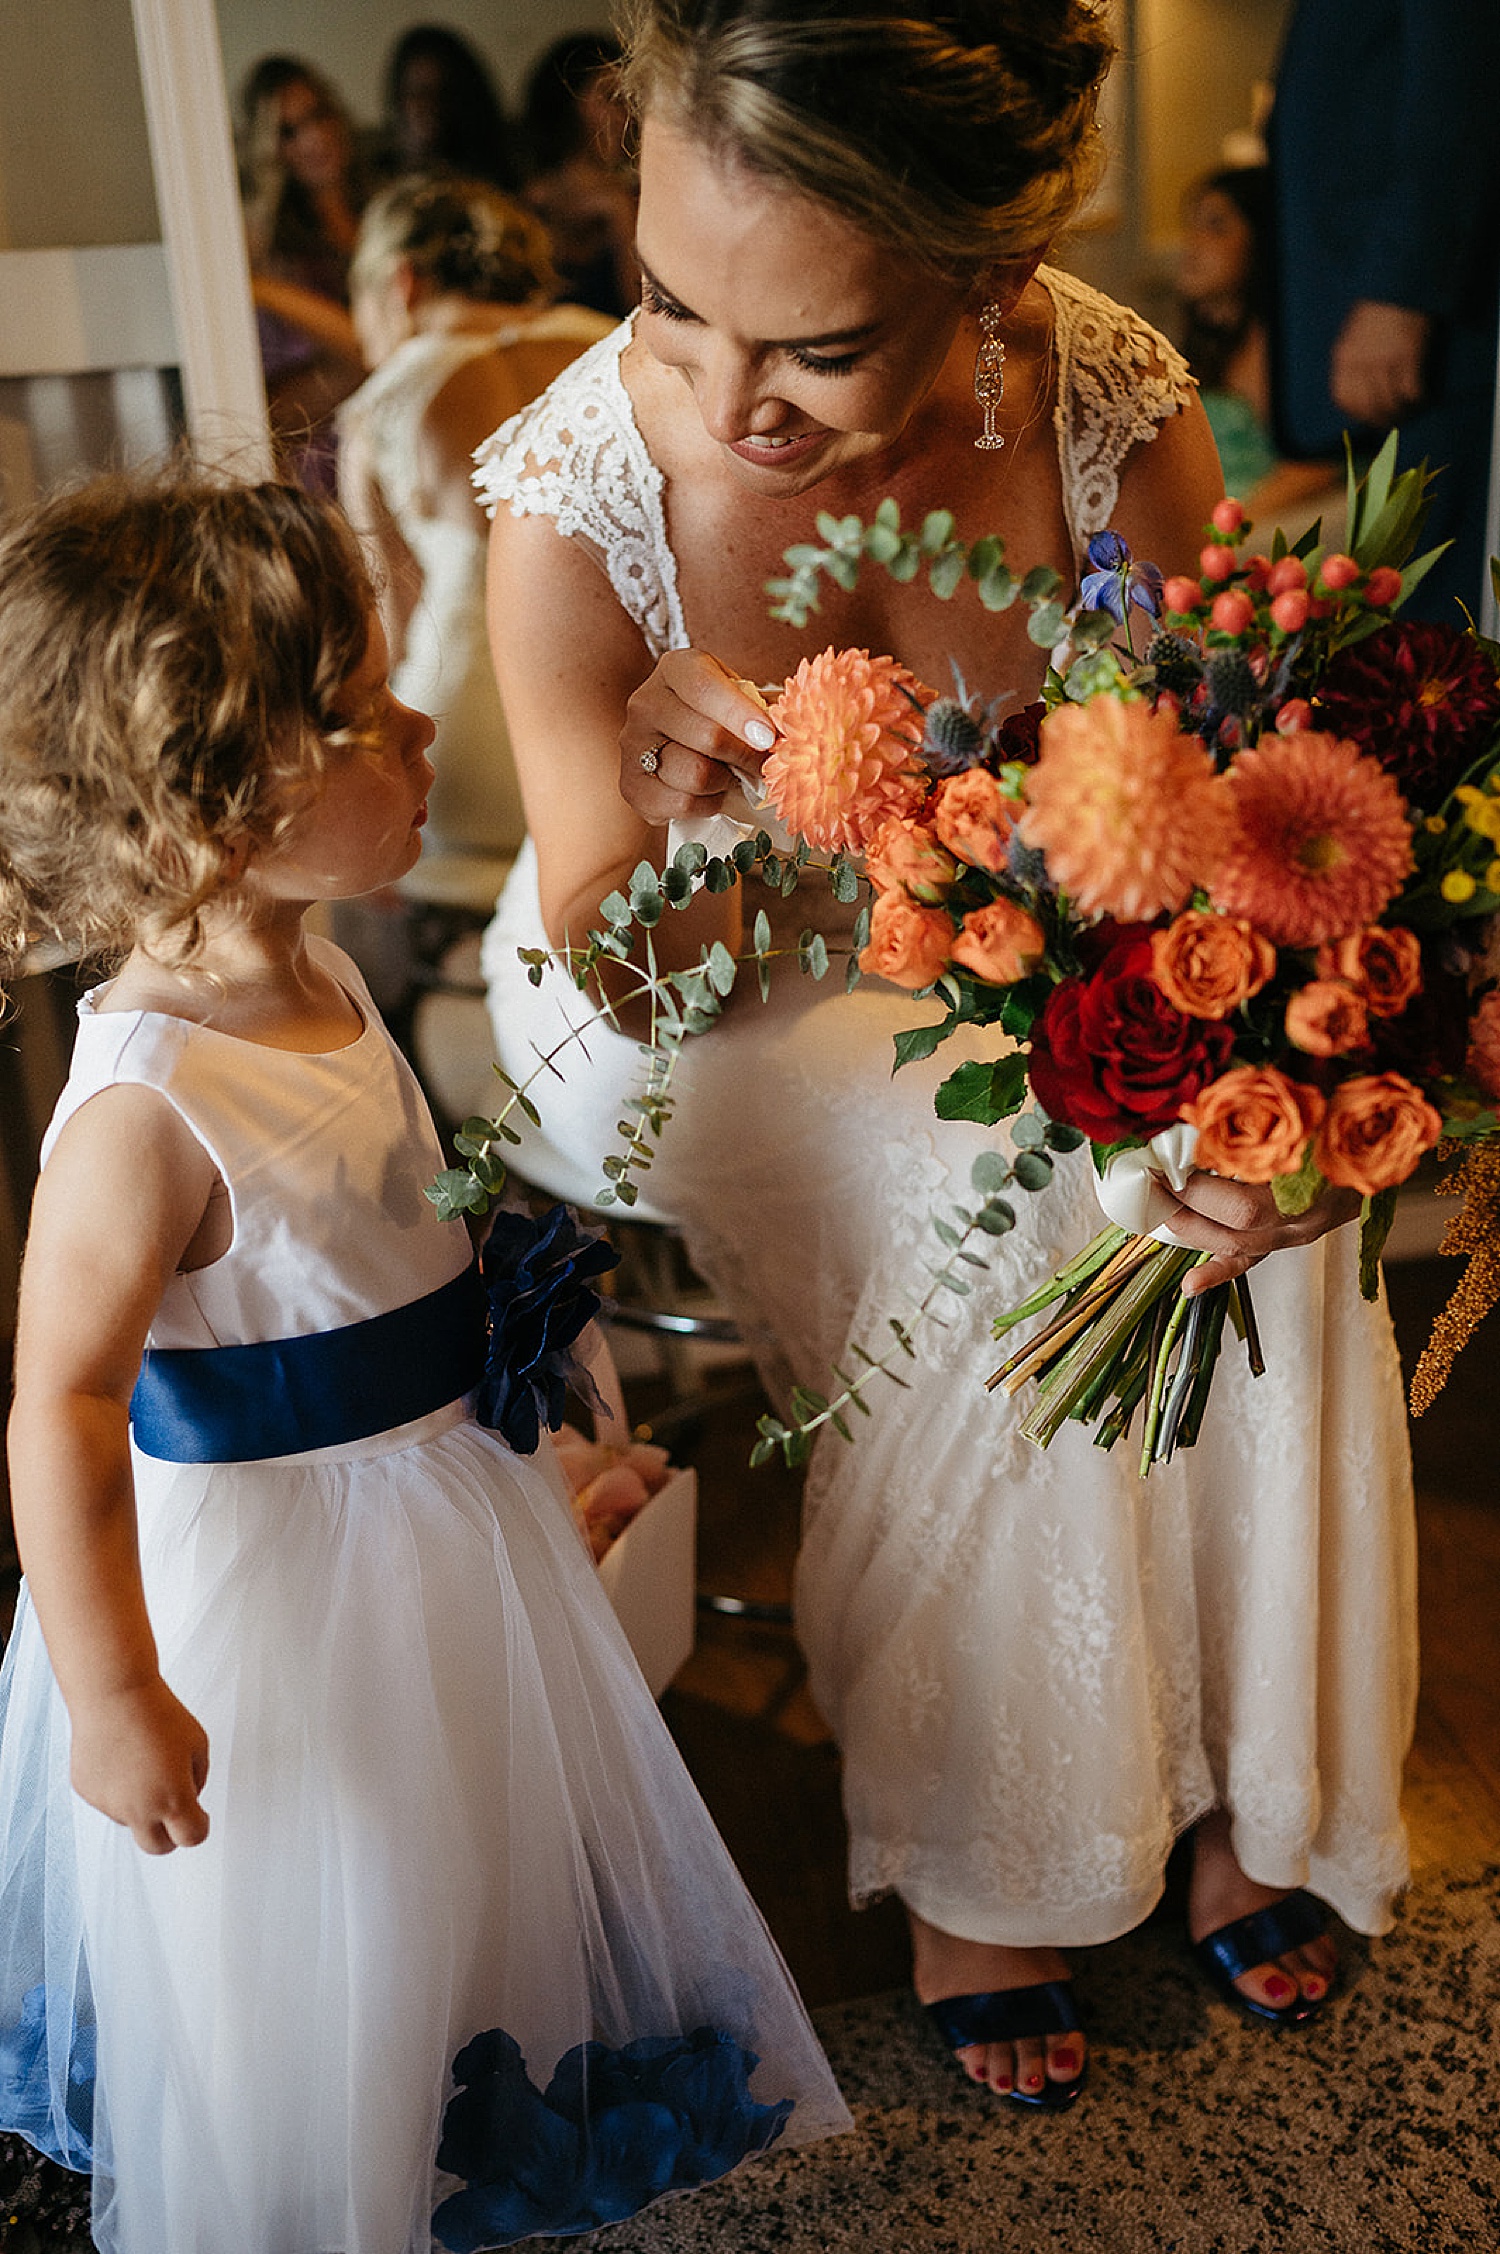 Bride shows flower girl wedding bouquet while wearing champagne earrings